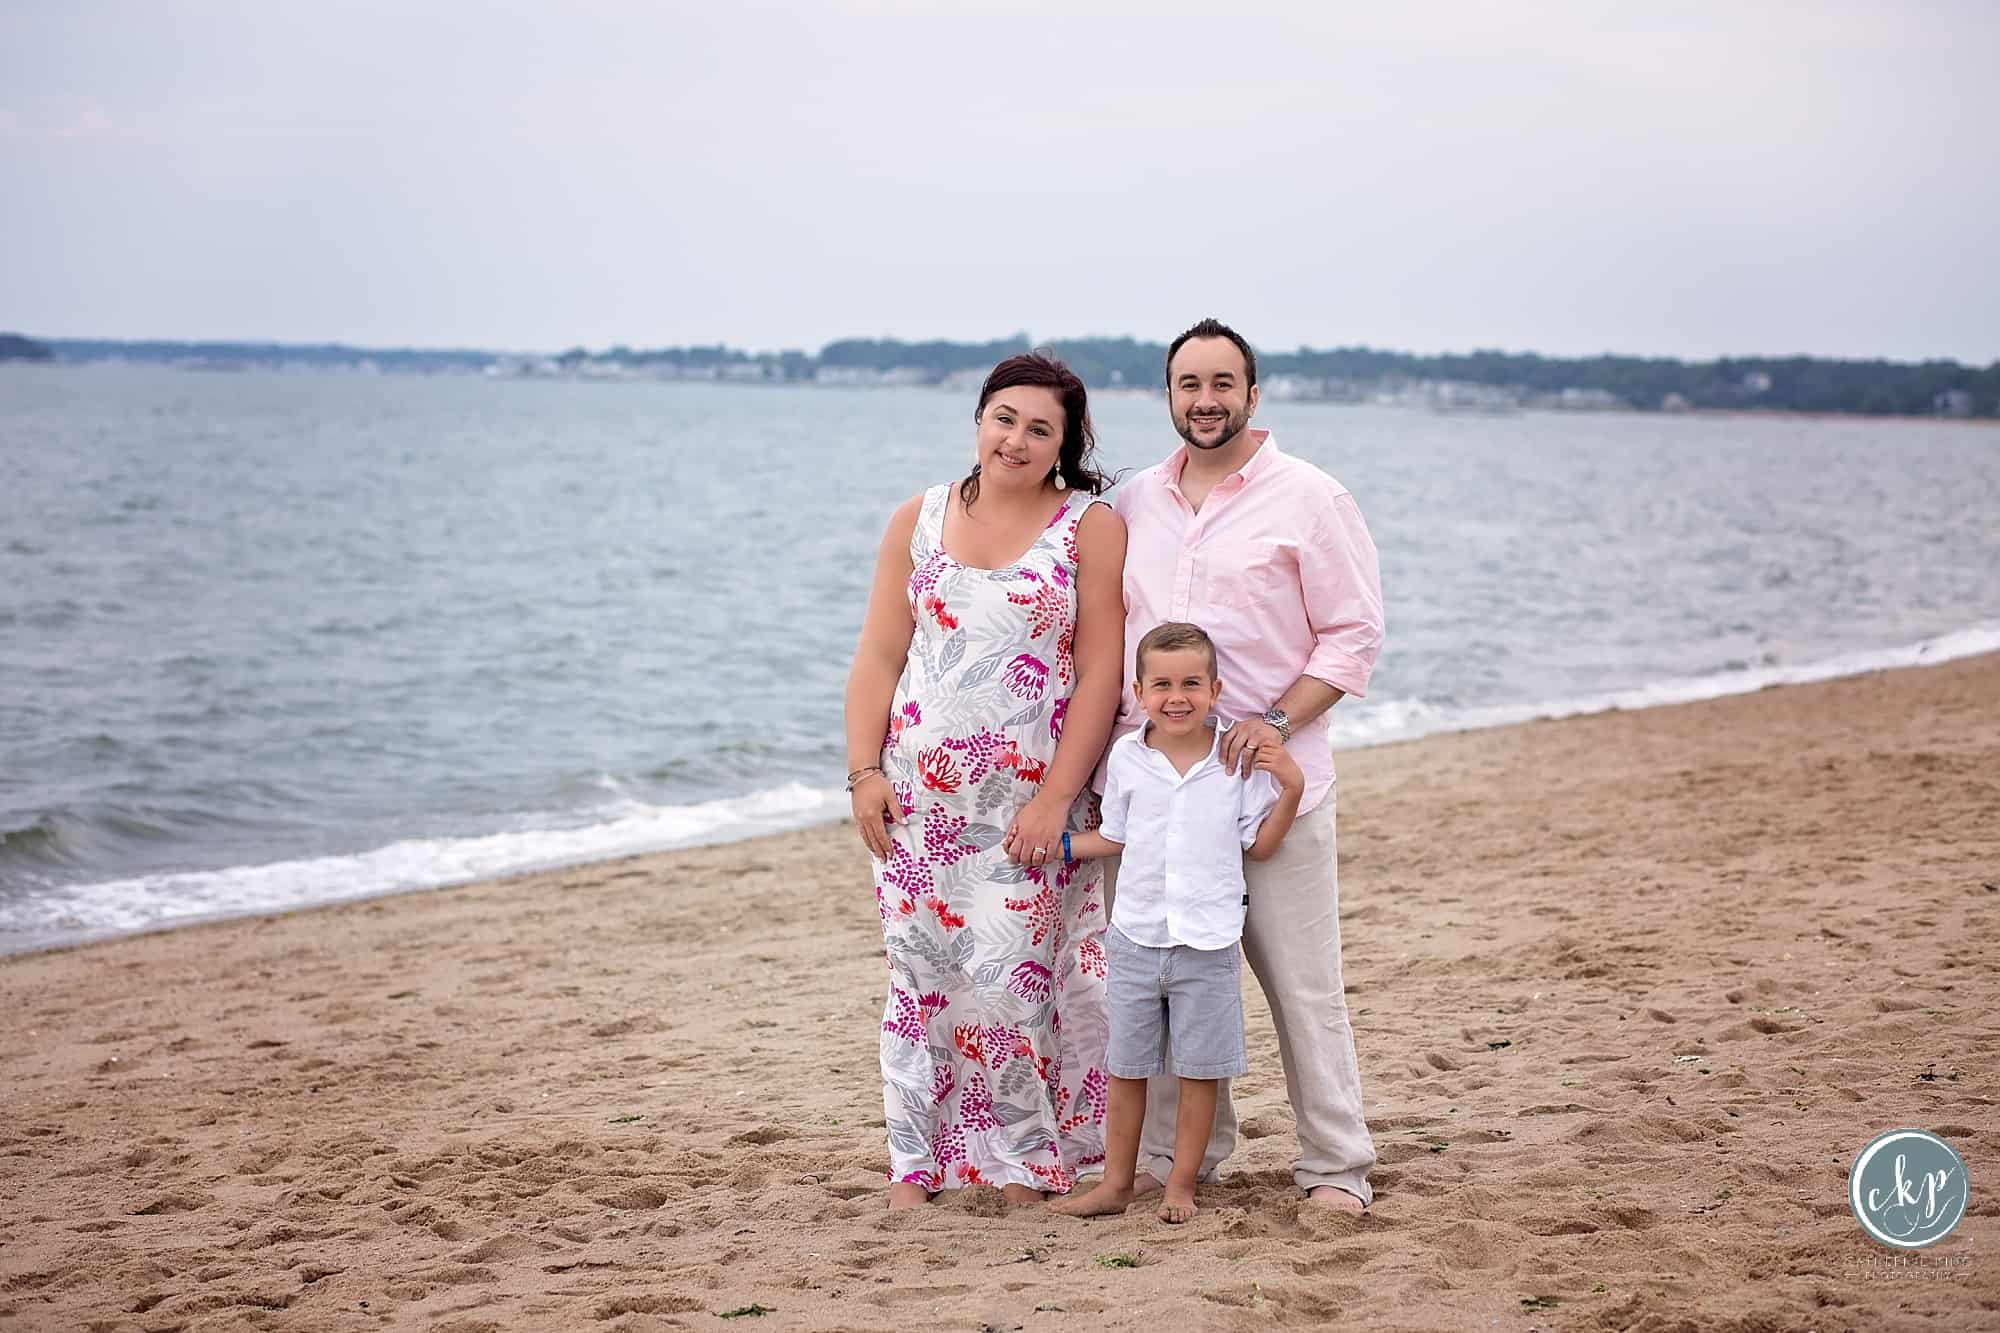 early fall ct beach family photography session in madison ct by catherine king photogoraphy a ct family photographer